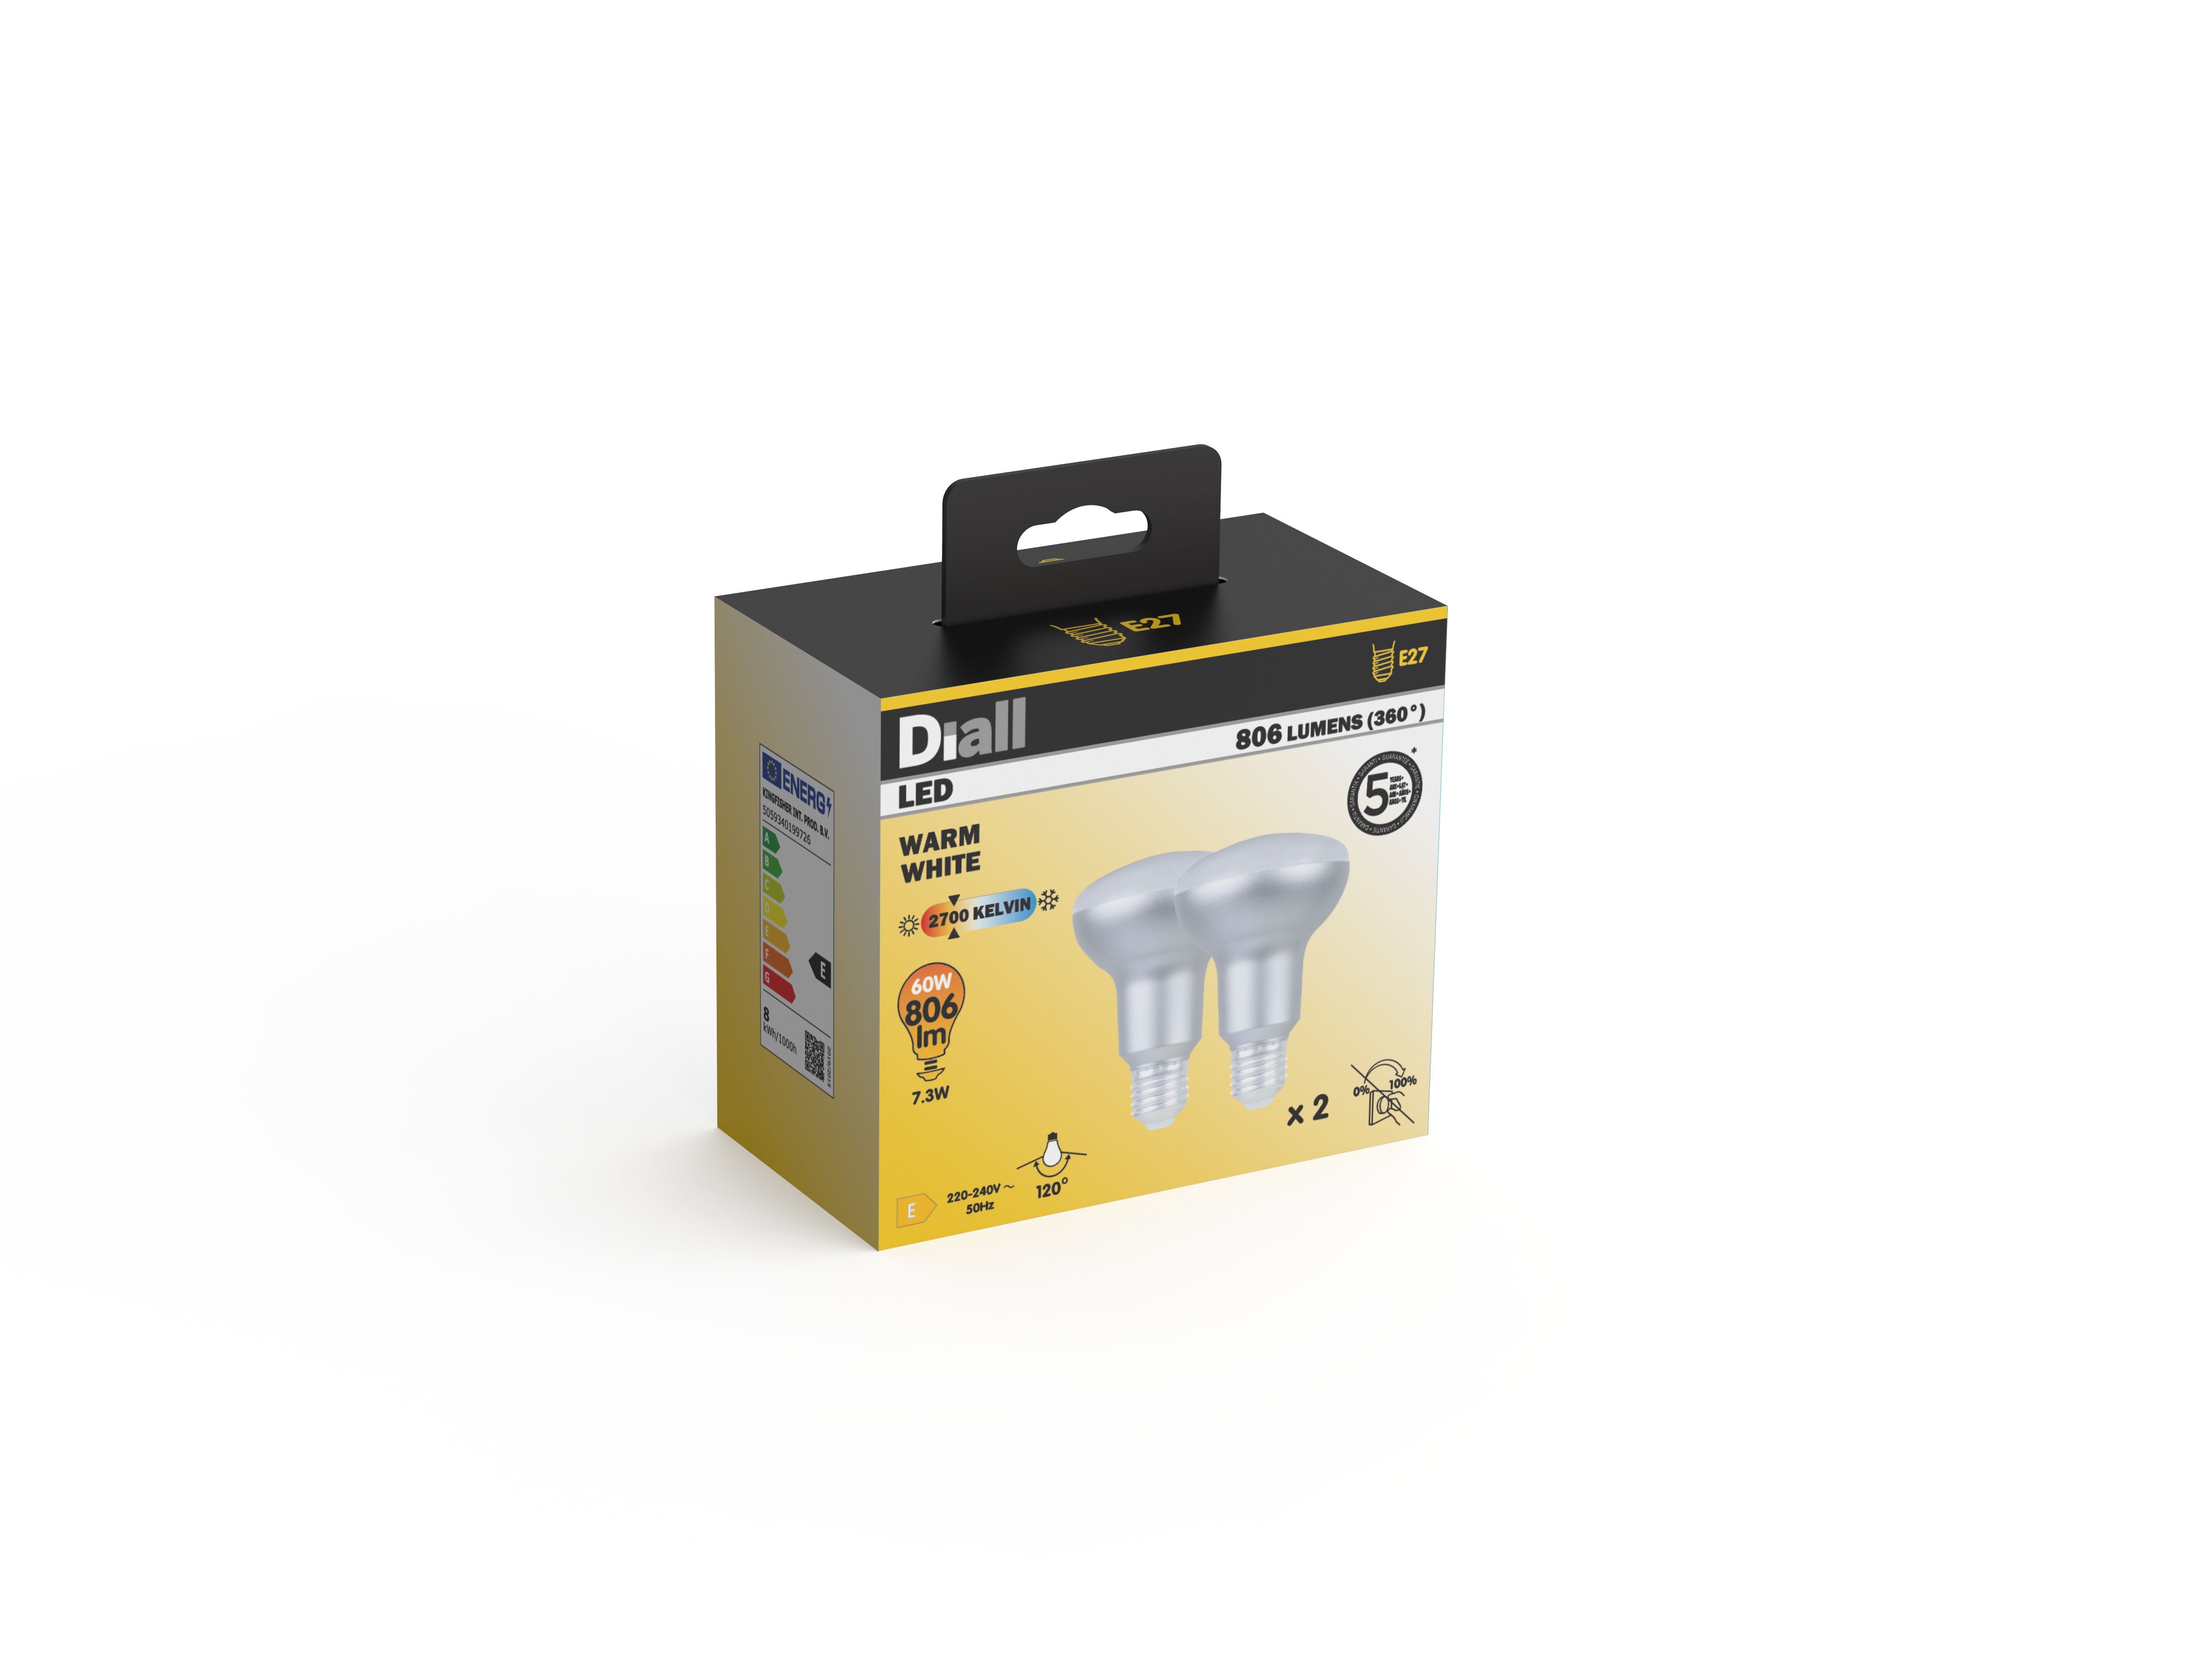 Diall 7.3W 806lm Frosted Reflector (R80) Warm white LED Light bulb, Pack of 2